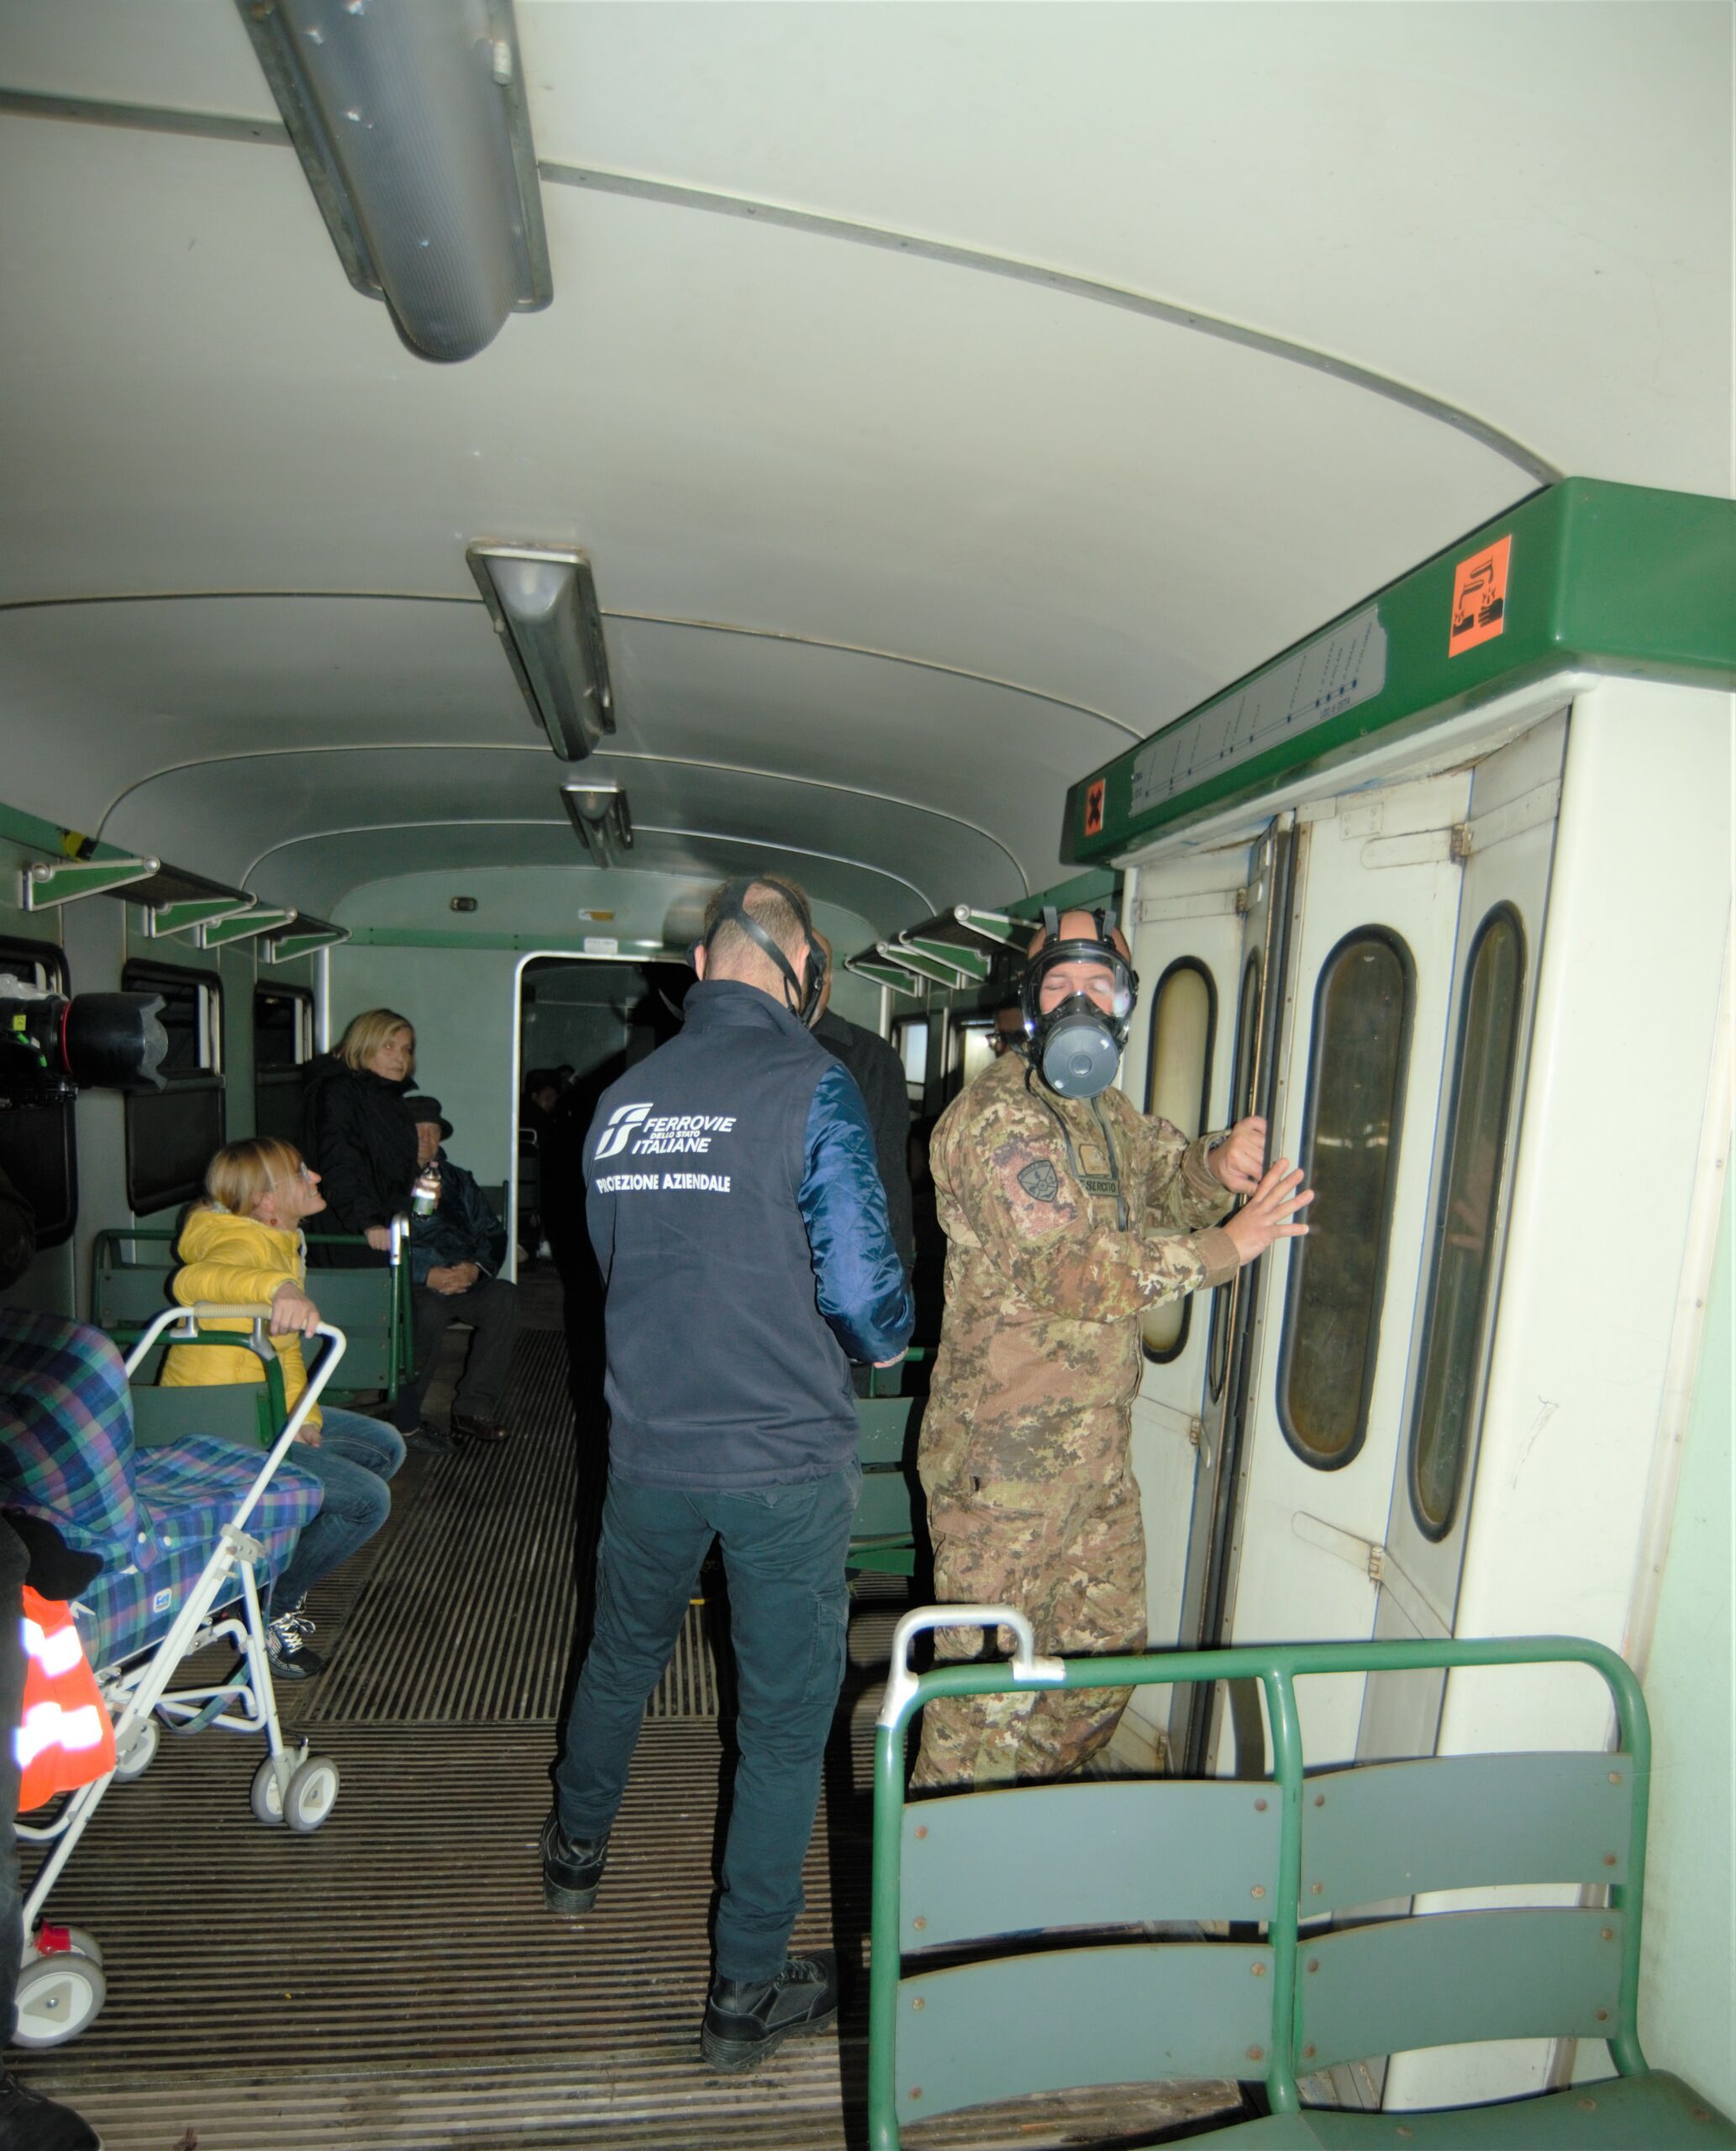 Around 4 people are sitting on train and looking at first responders. Two men wearing respirators are standing close to the train door and a man in an army uniform is trying to open the train door.